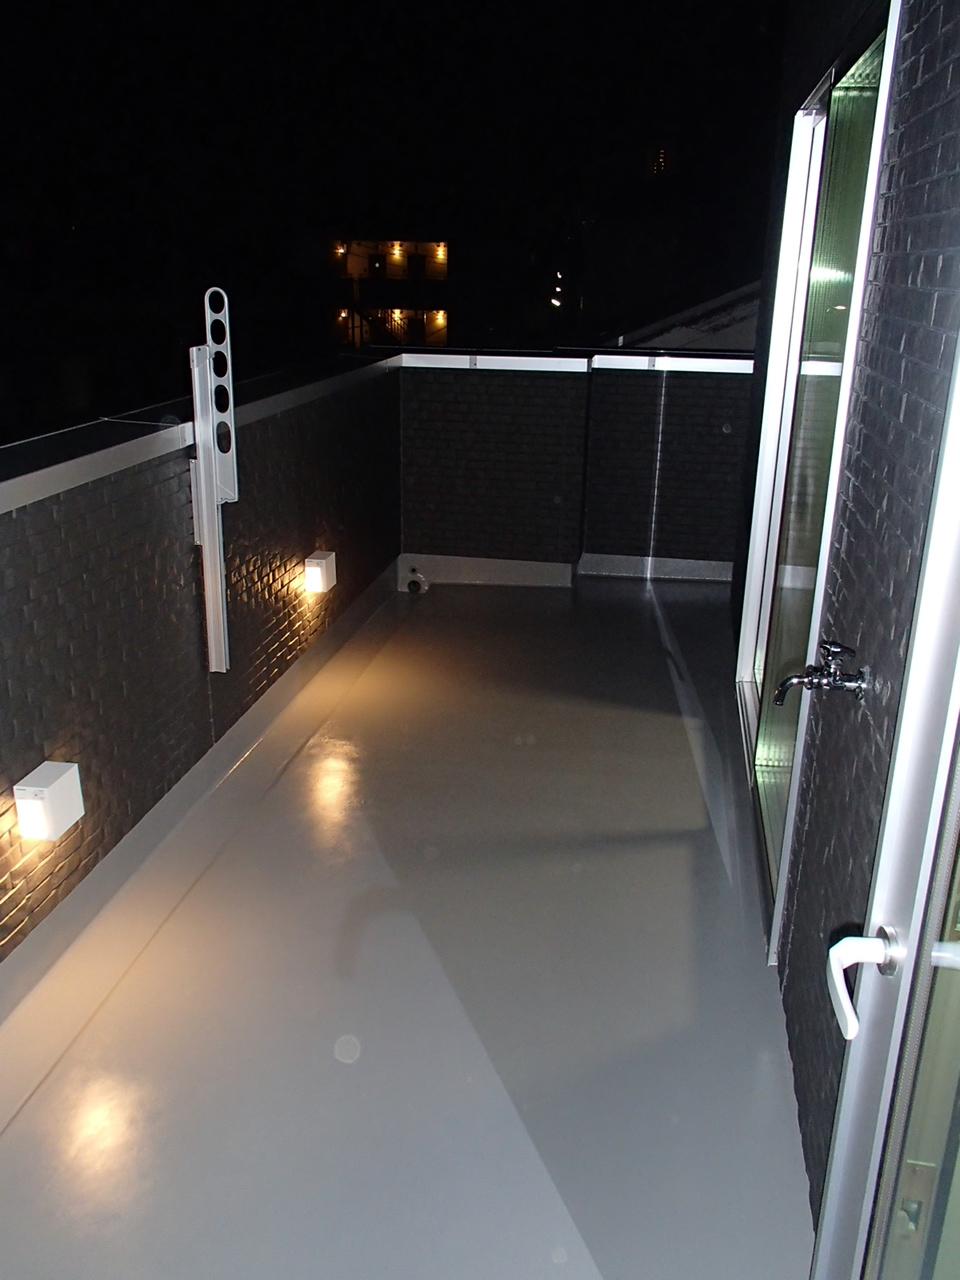 Balcony. With a convenient water supply to the Sky balcony. Pool and gardening, Also to clean a big success! Resort feeling if Tomose the lighting at a garden furniture! 